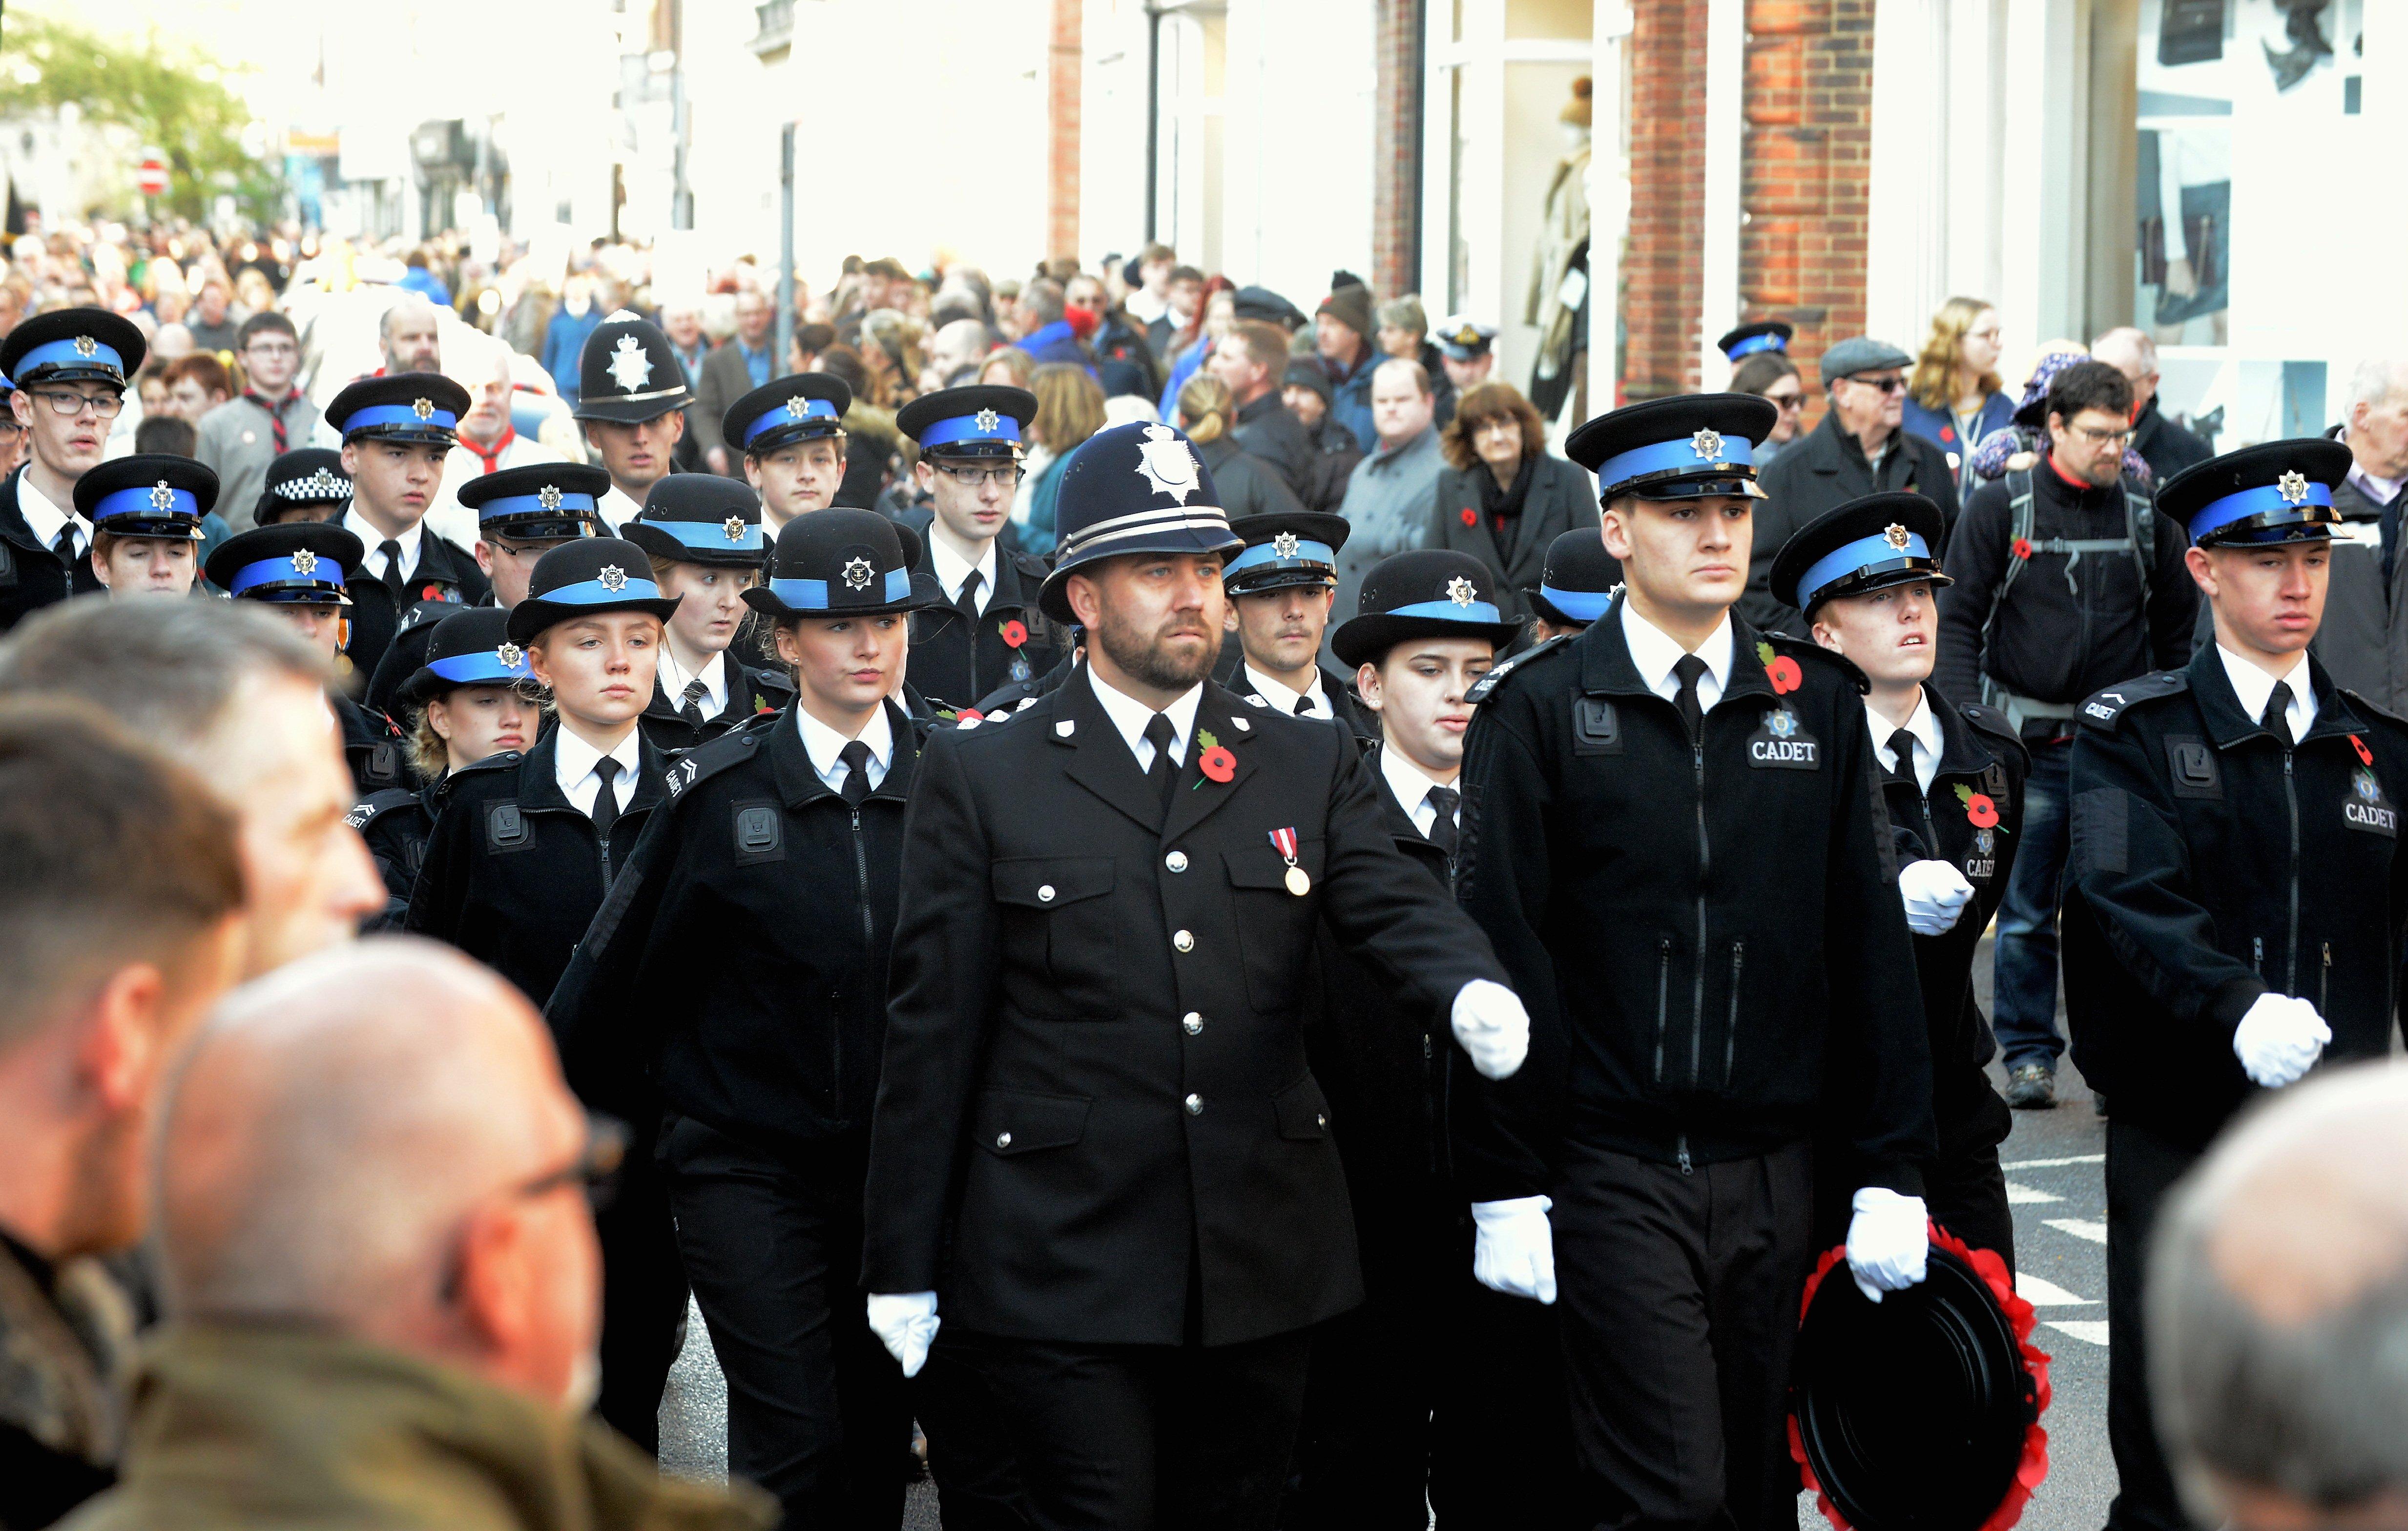 ks190610-18 Chichester Remembrance phot kate SUS-191011-200818008